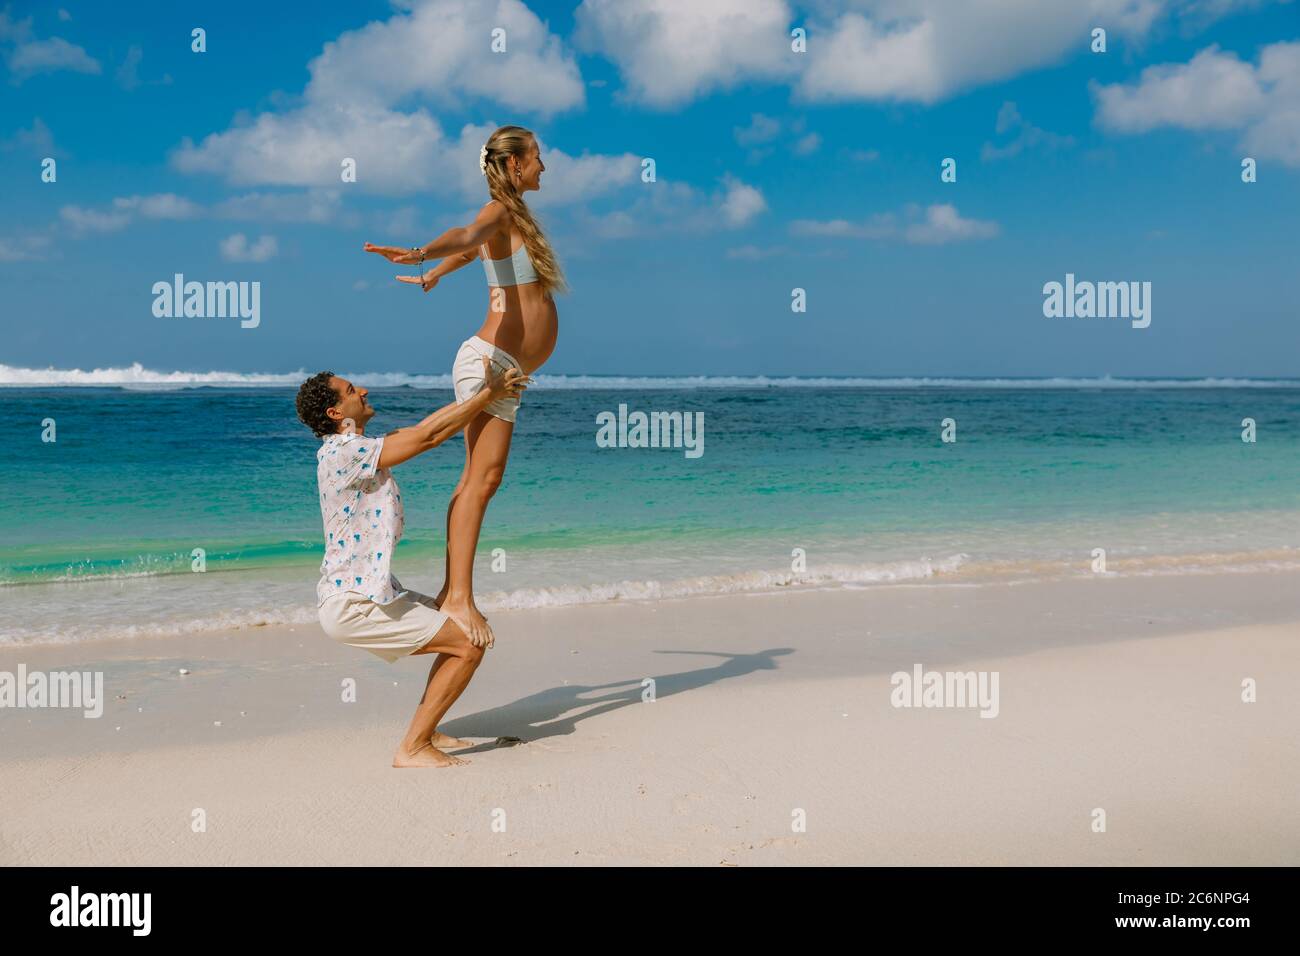 https://c8.alamy.com/comp/2C6NPG4/pregnant-woman-with-husband-expecting-baby-with-yoga-pose-at-ocean-beach-2C6NPG4.jpg